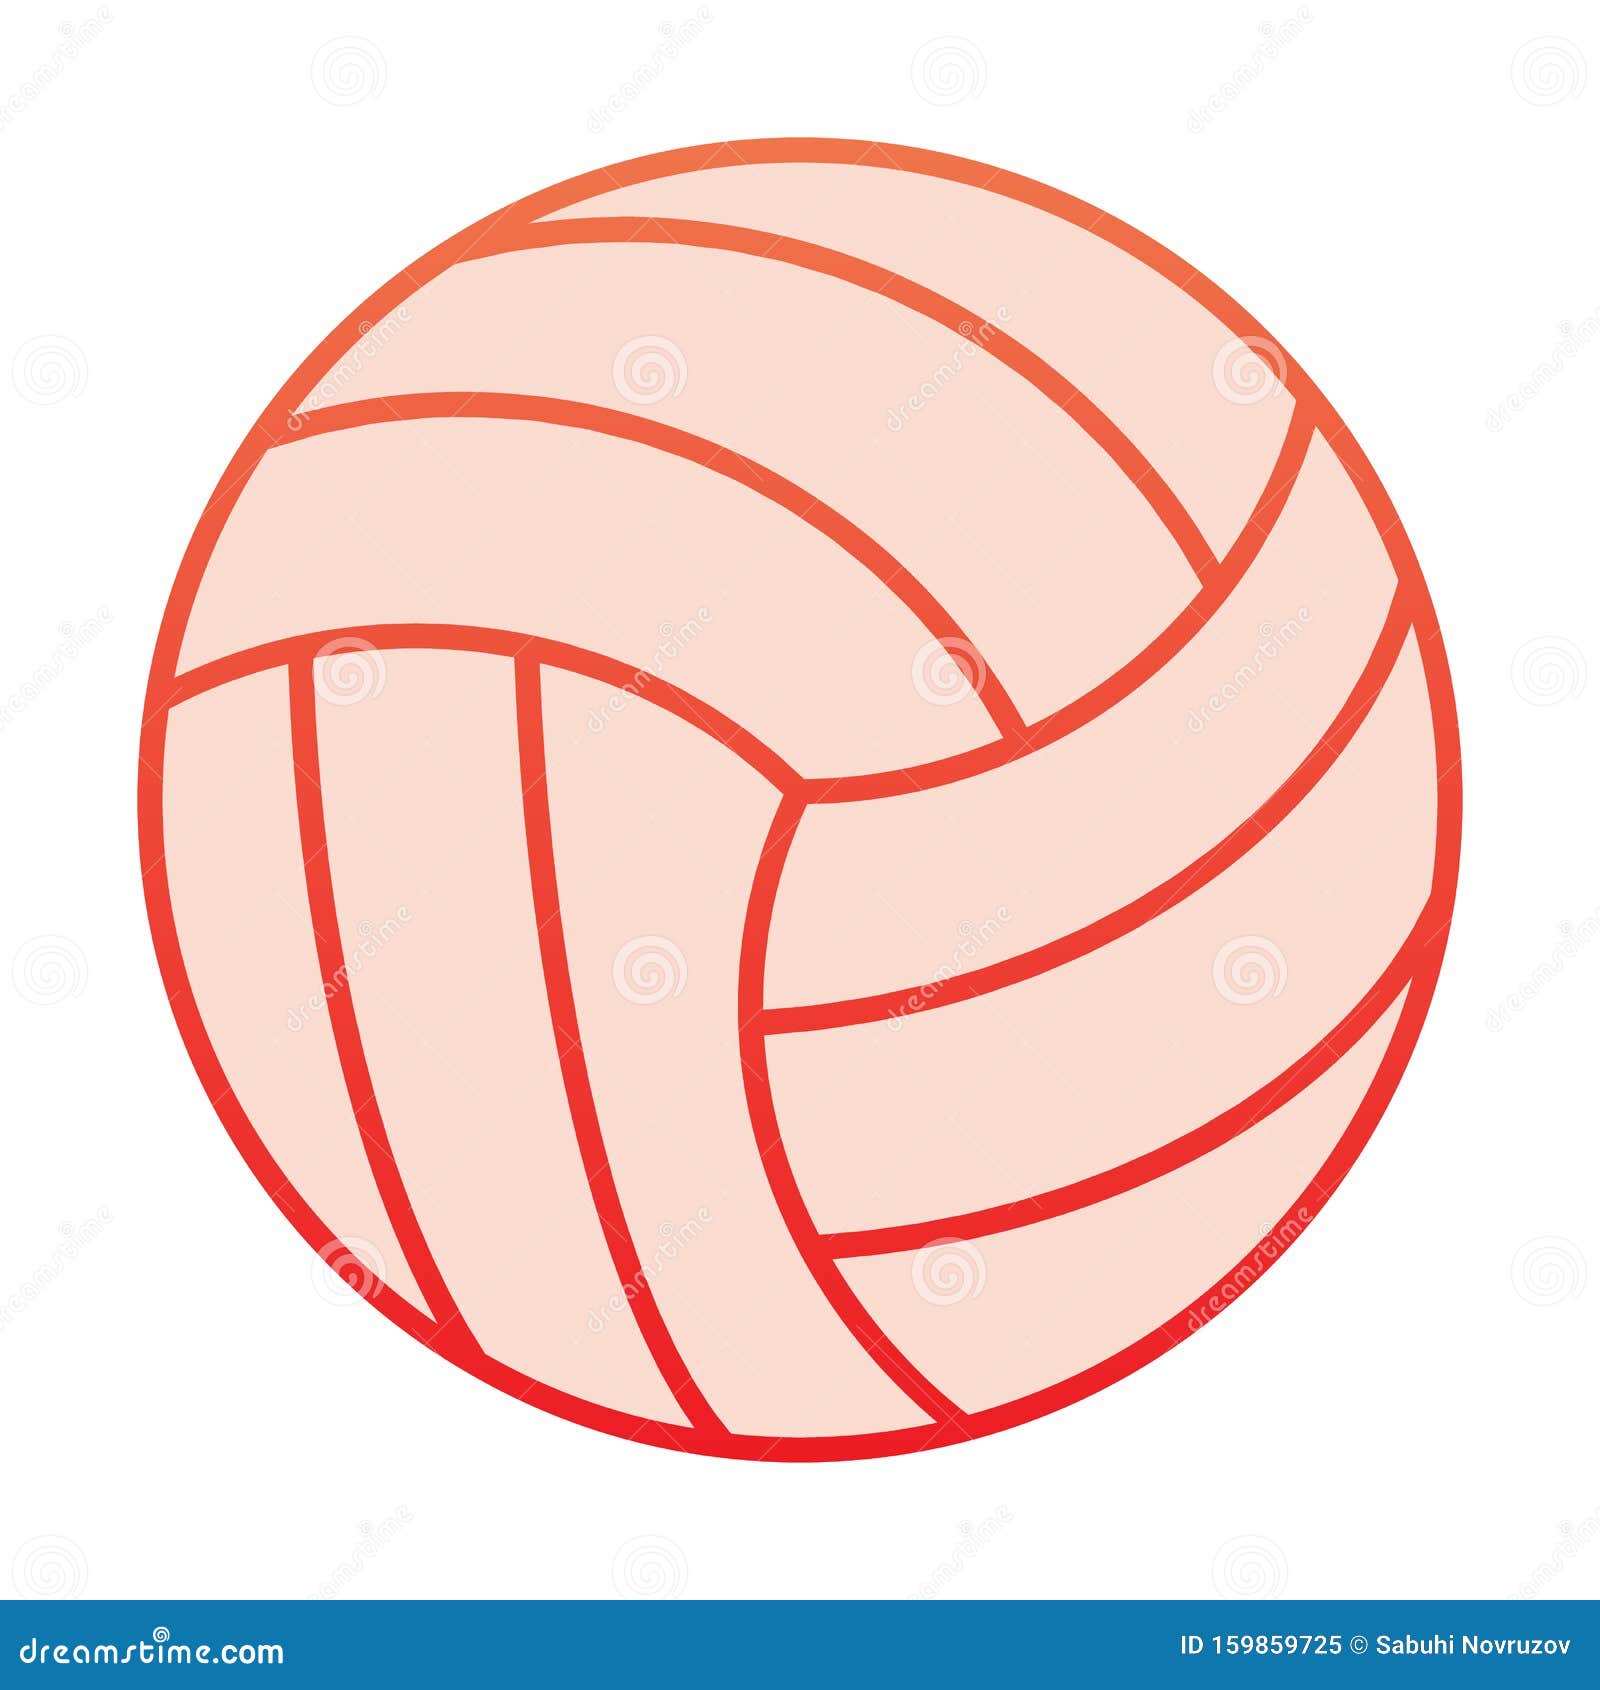 Volleyball Ball Flat Icon. Sports Equipment Red Icons in Trendy Flat ...